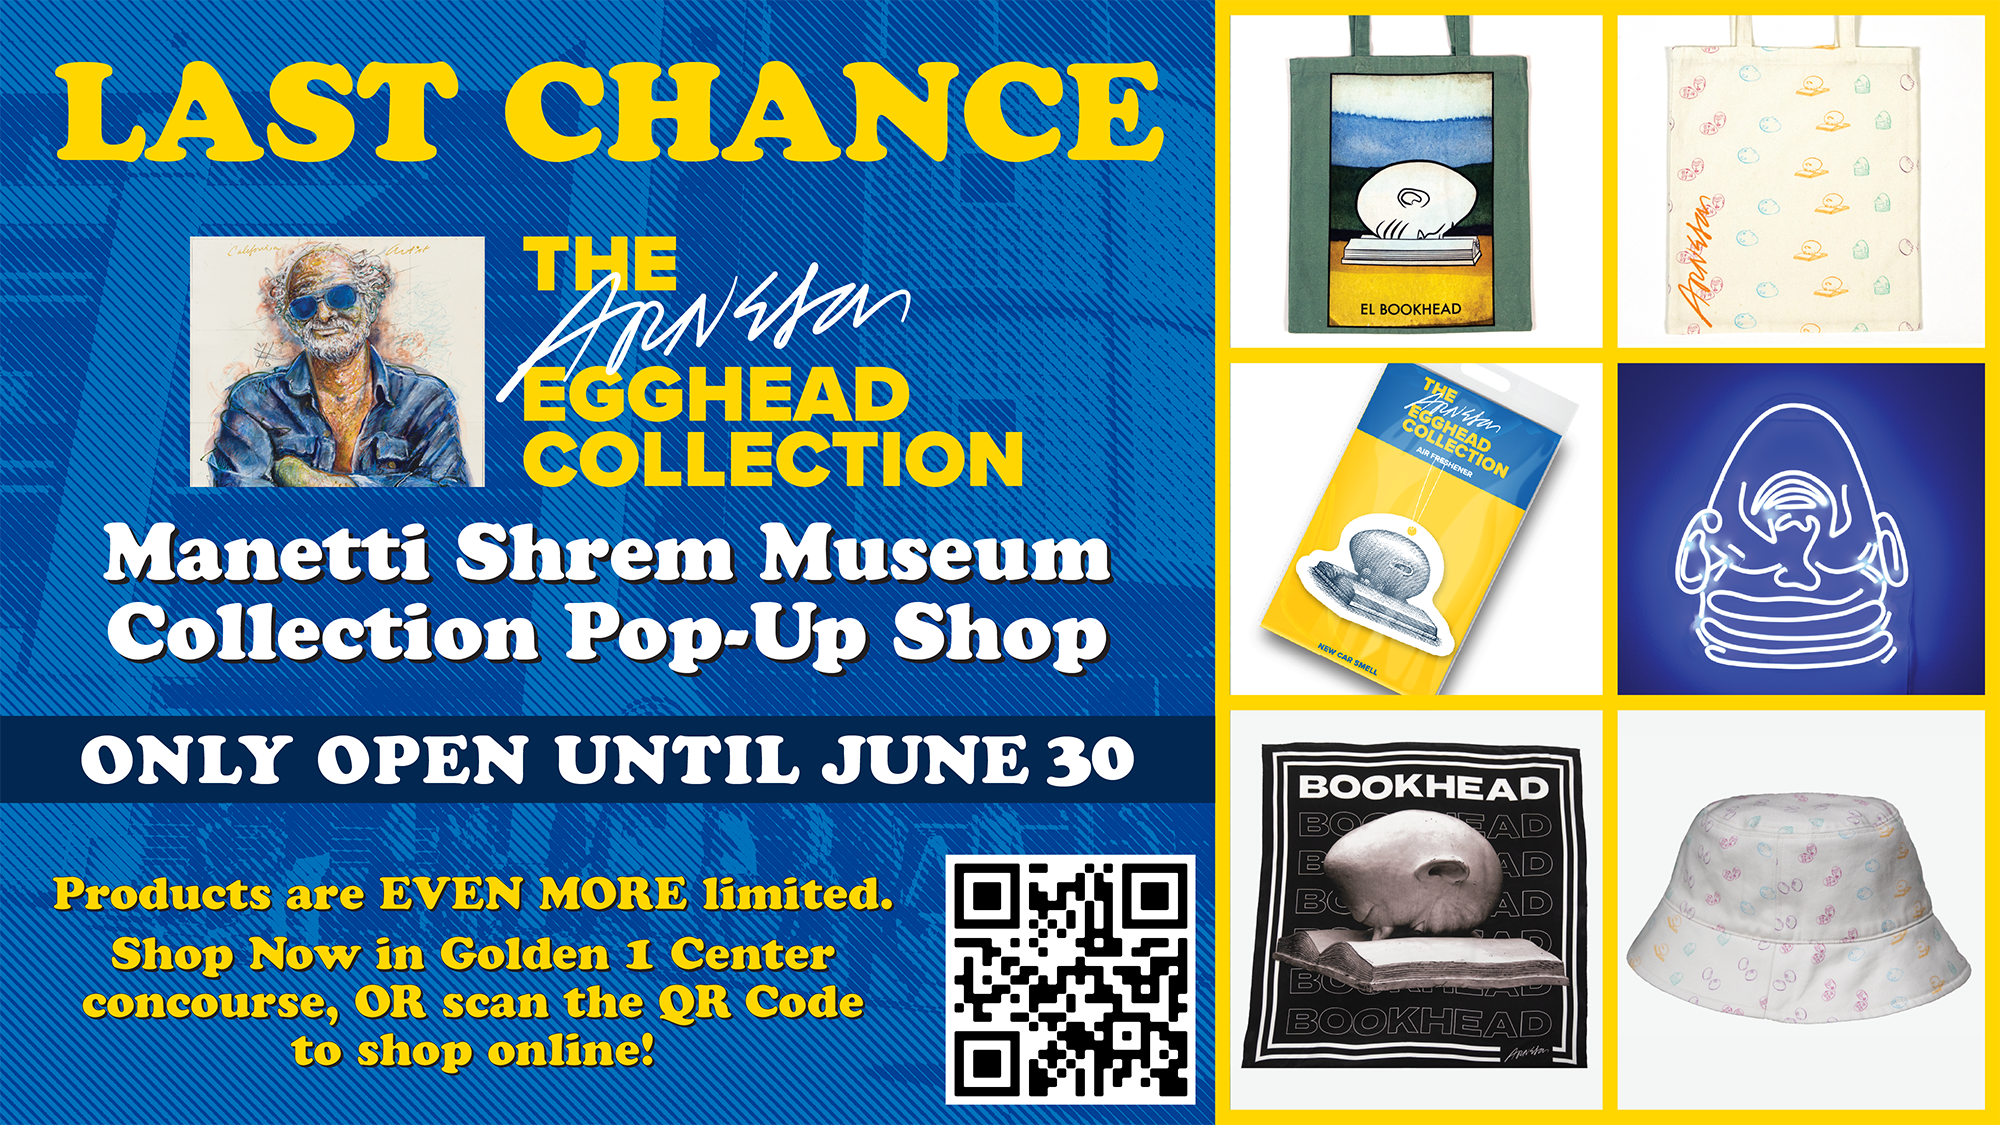 A flier with a blue background and the headline Last Chance features an illustration of Robert Arneson on the left side and Egghead merchandise on the right side. 